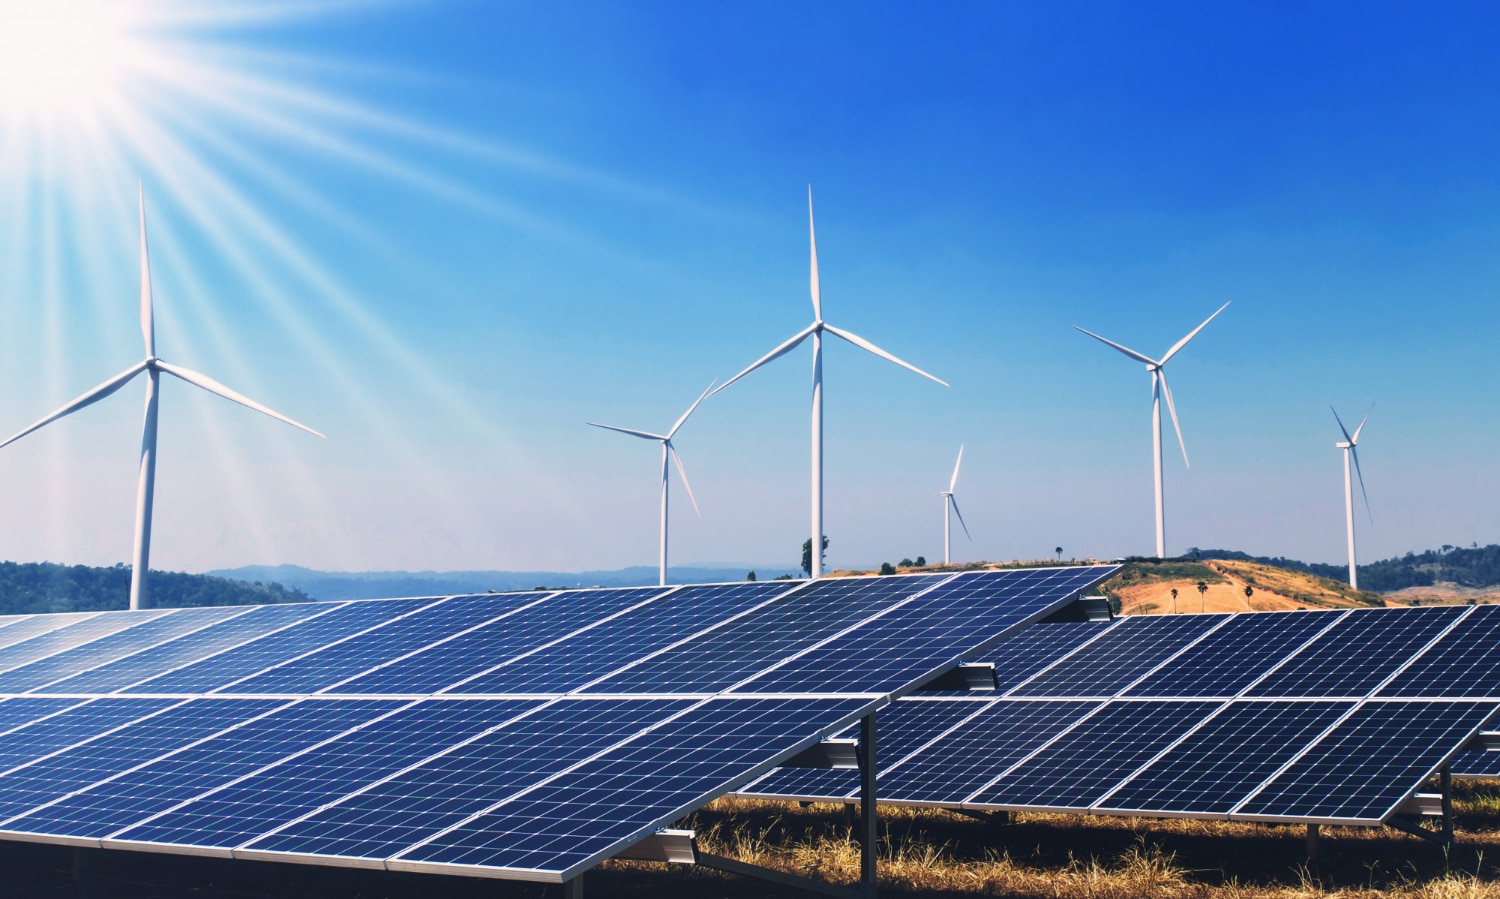 Renewable energy to supply over a third of global electricity by 2030.